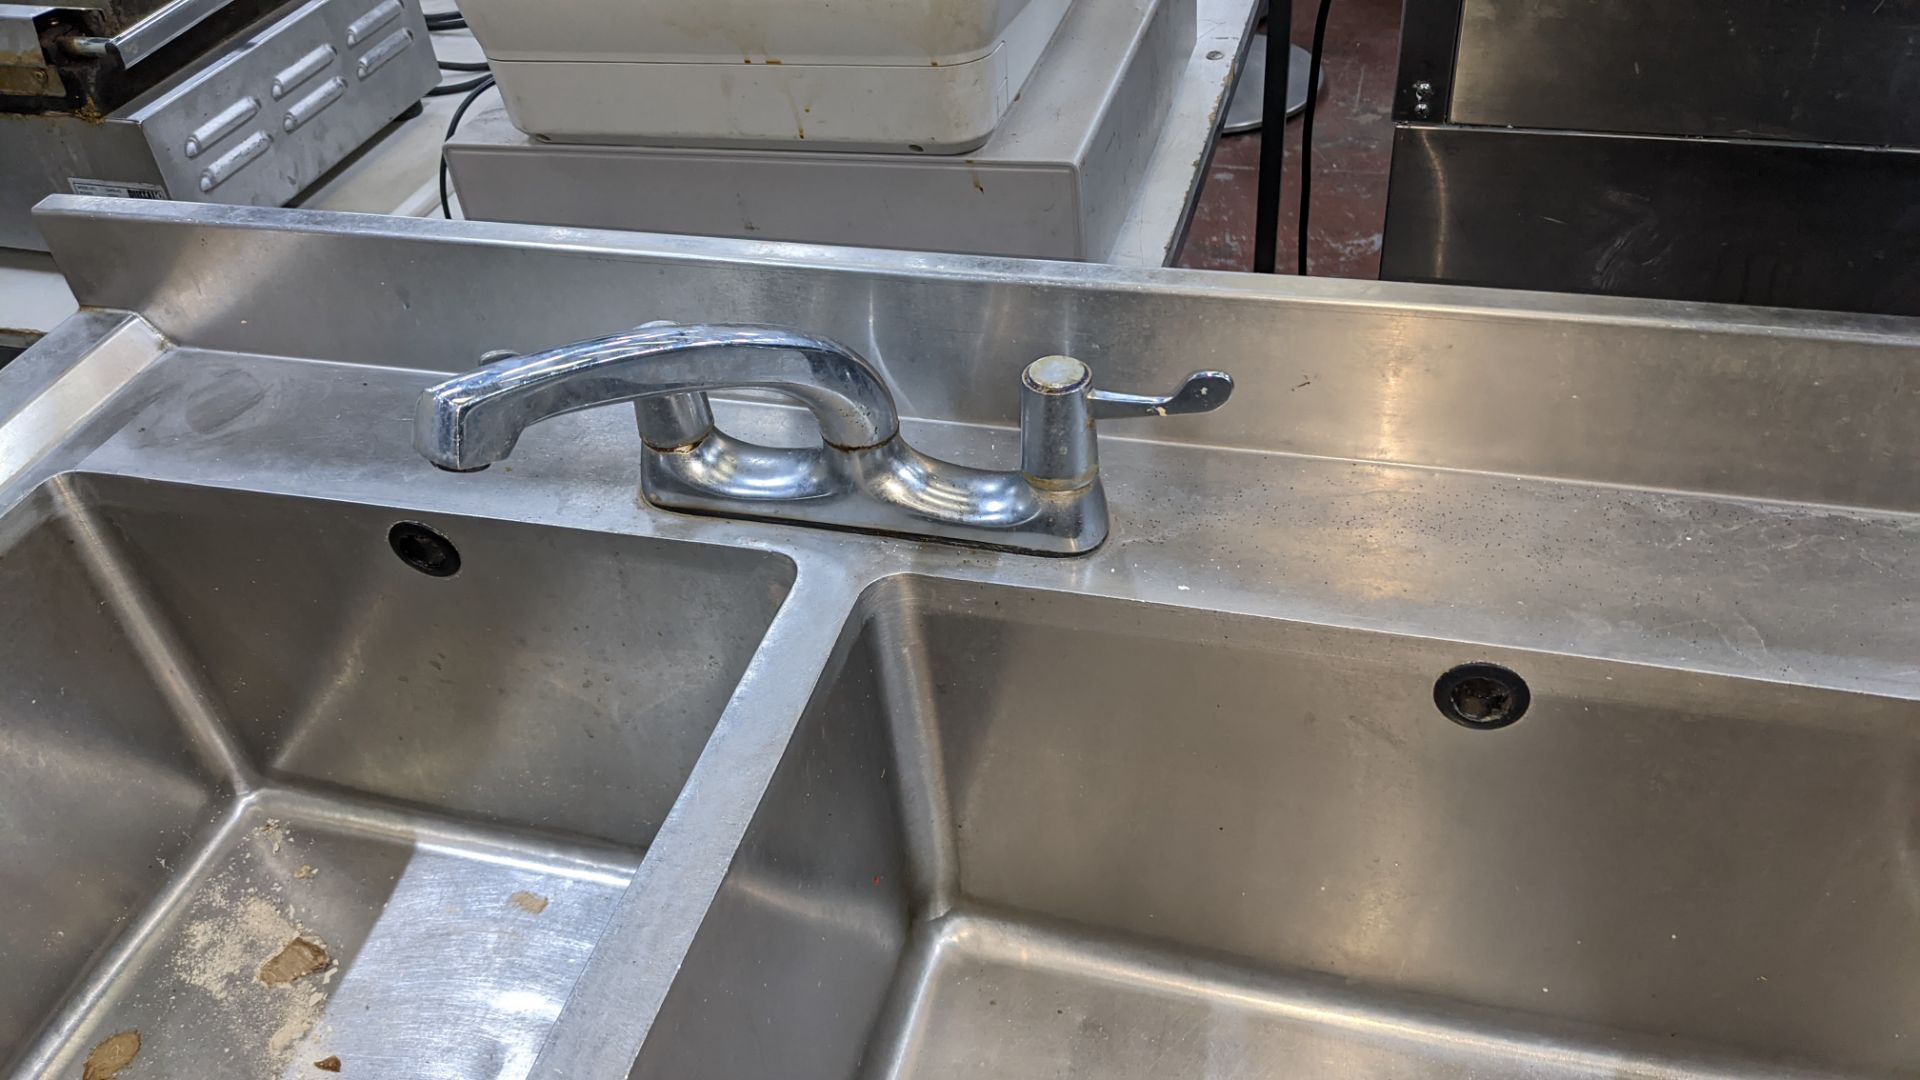 Floor standing stainless steel twin bowl sink incorporating drainer to the right & mixer taps - Image 4 of 5